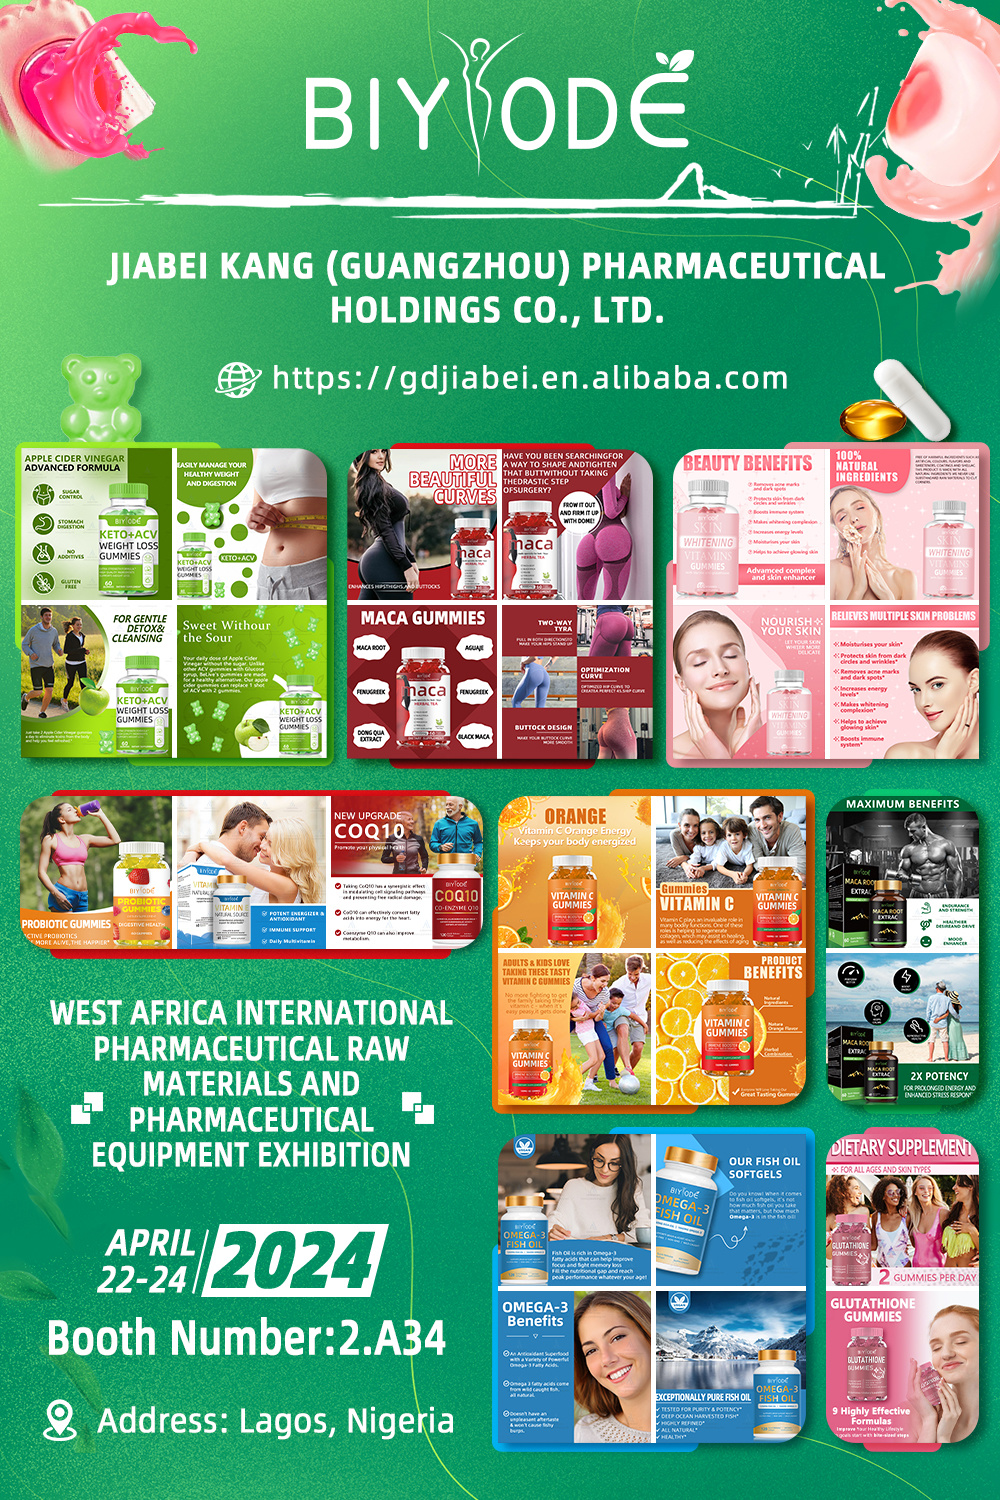 JiaBeikang will grandly participate in Nigeria’s leading pharmaceutical trade exhibition